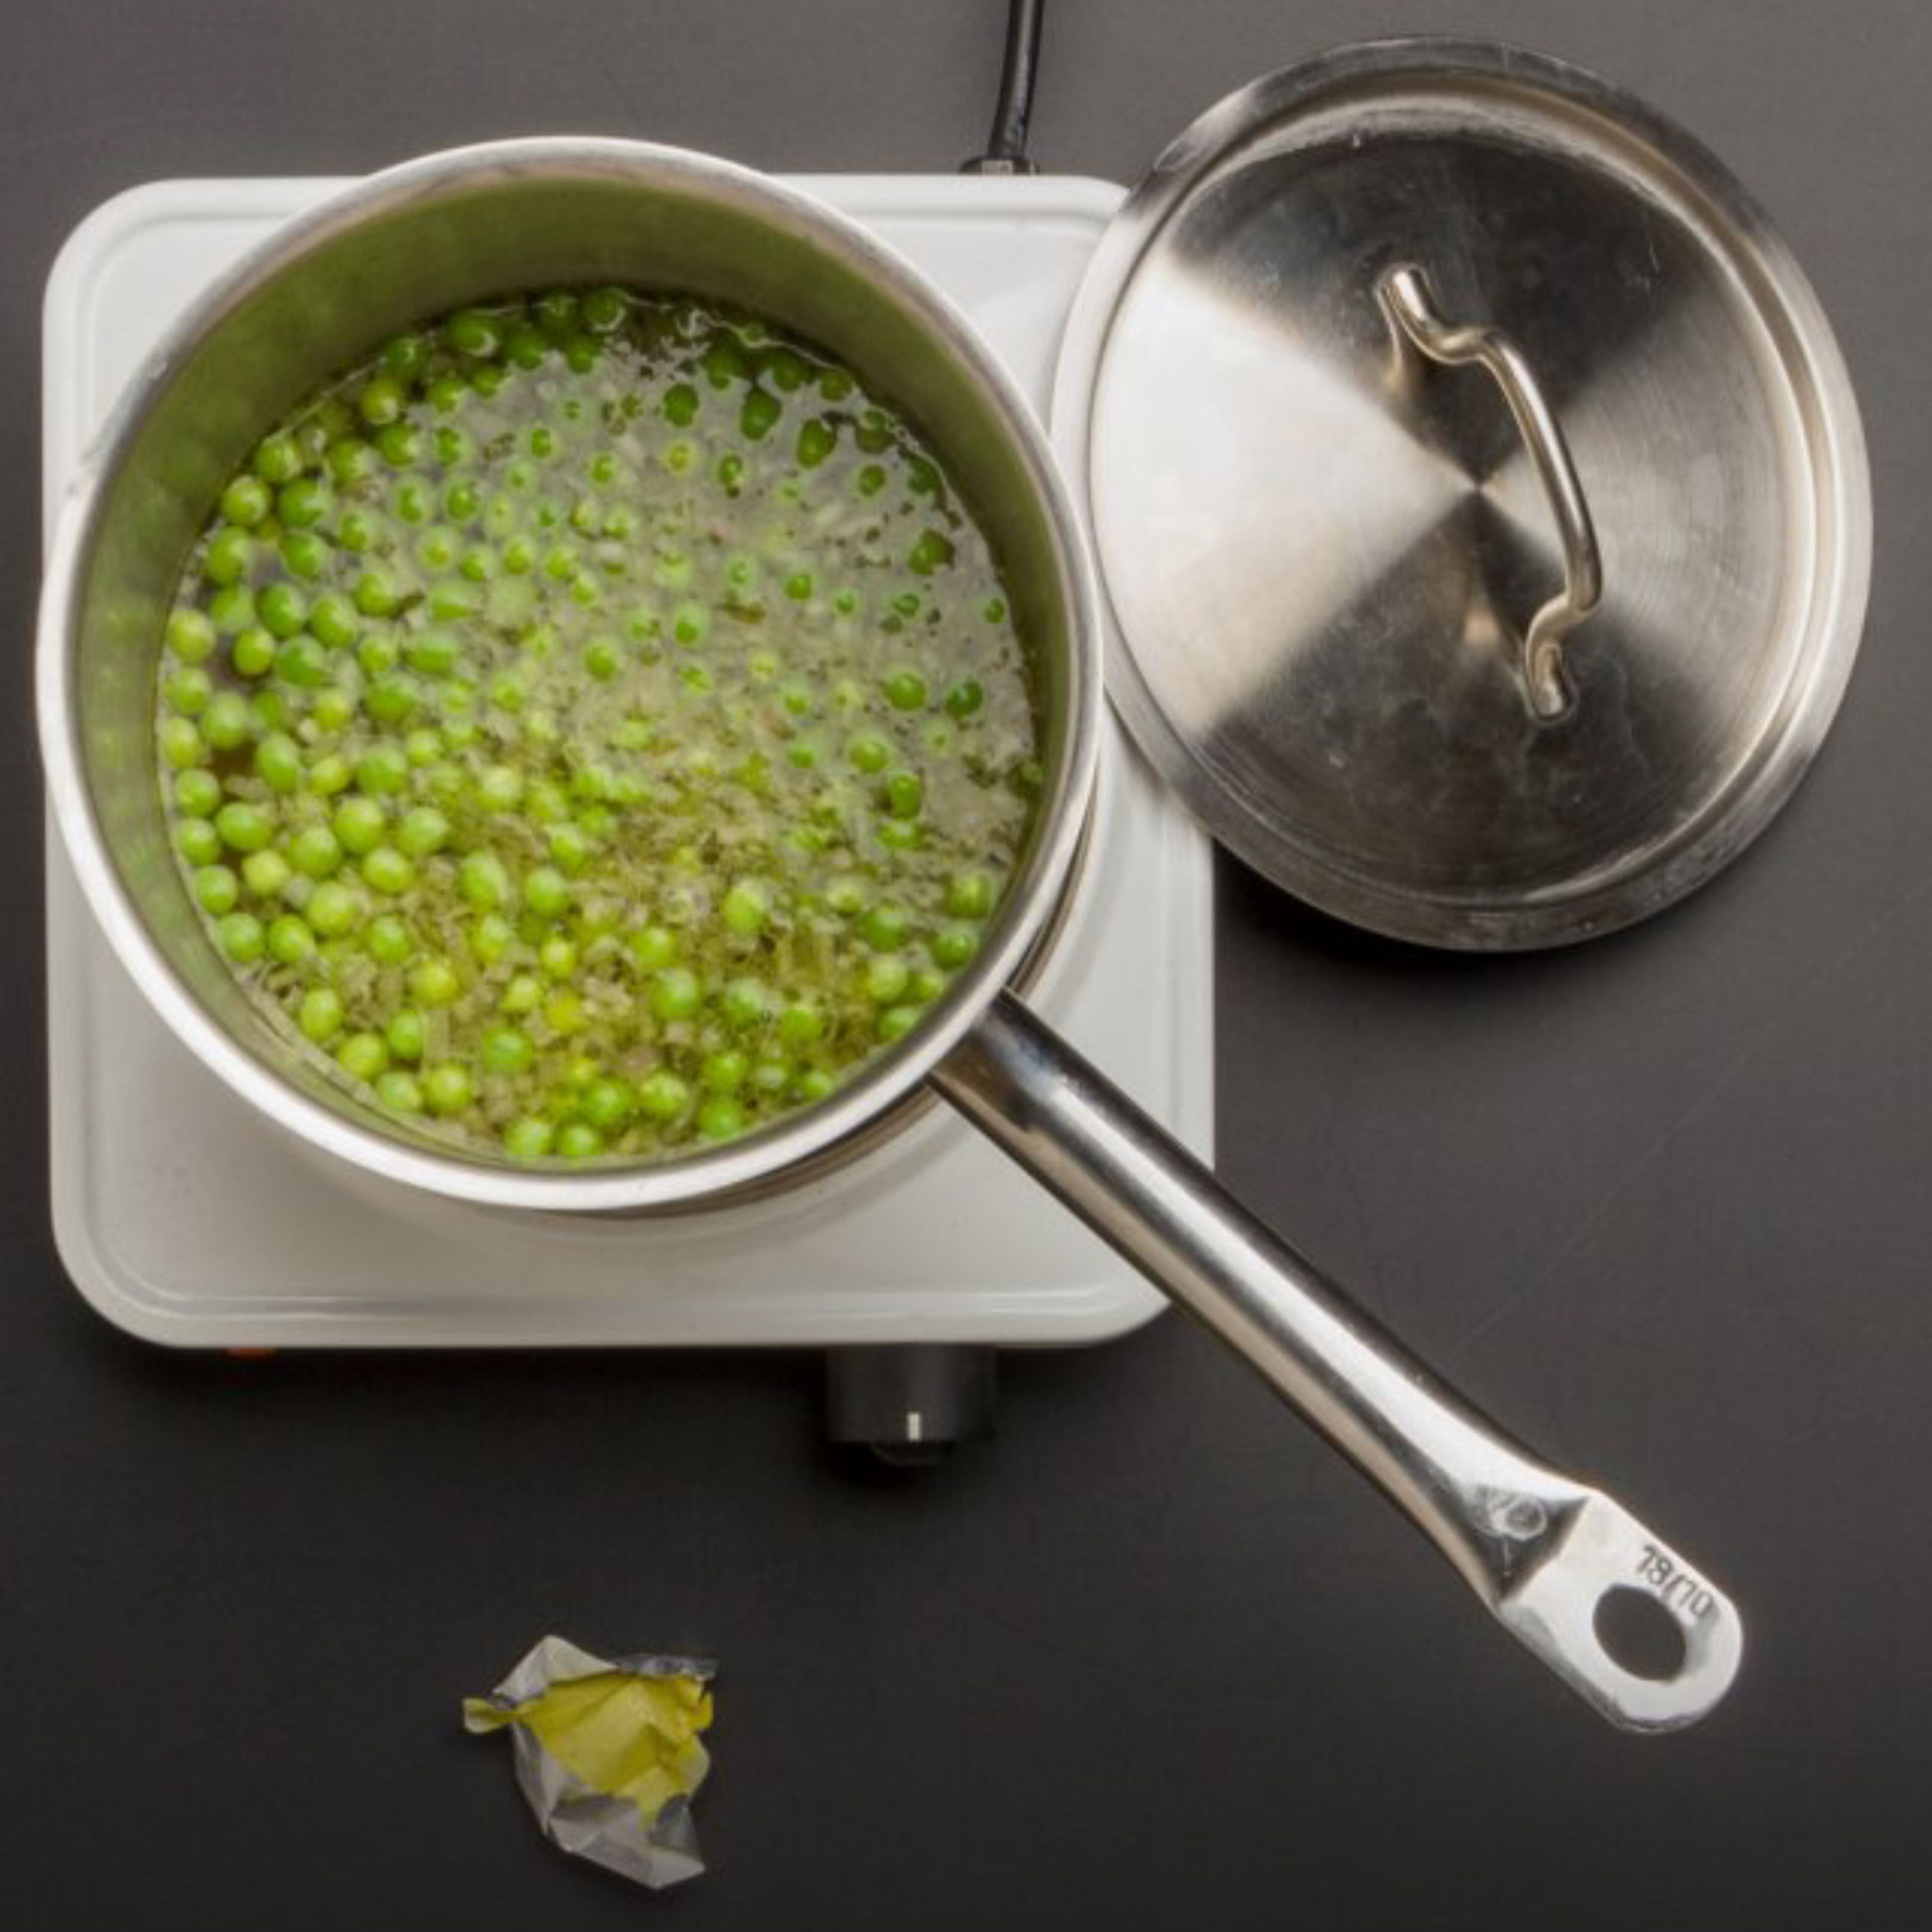 Add water and the bouillon to the saucepan, bring to boil and simmer for about 5 minutes at low to medium temperature. Add peas and simmer for about 10 minutes.